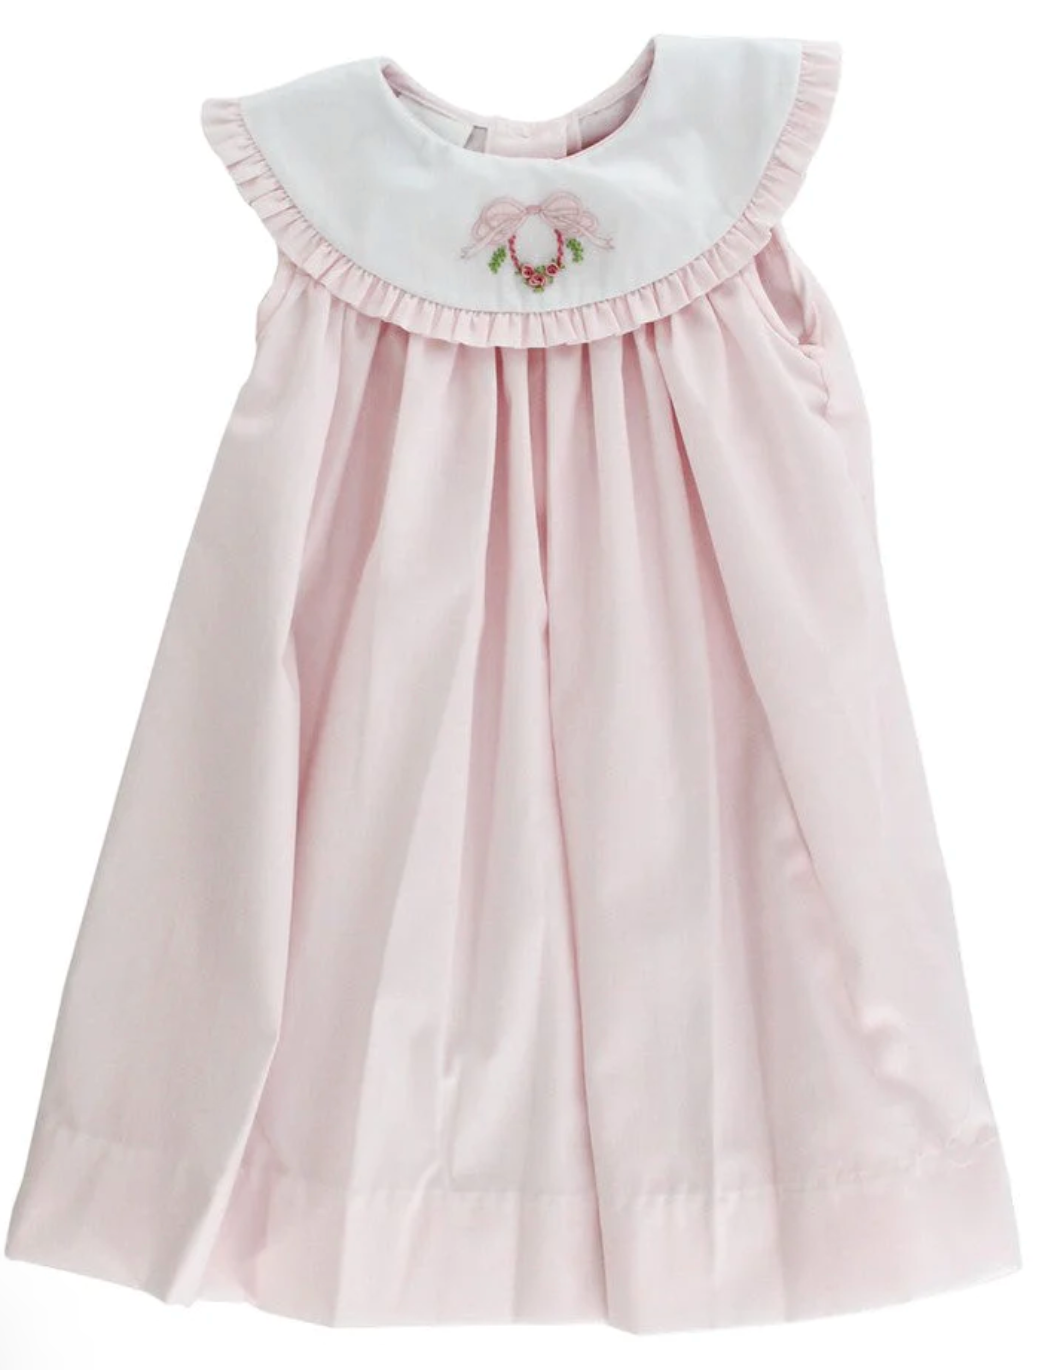 Wreath Dress with Pink Bow